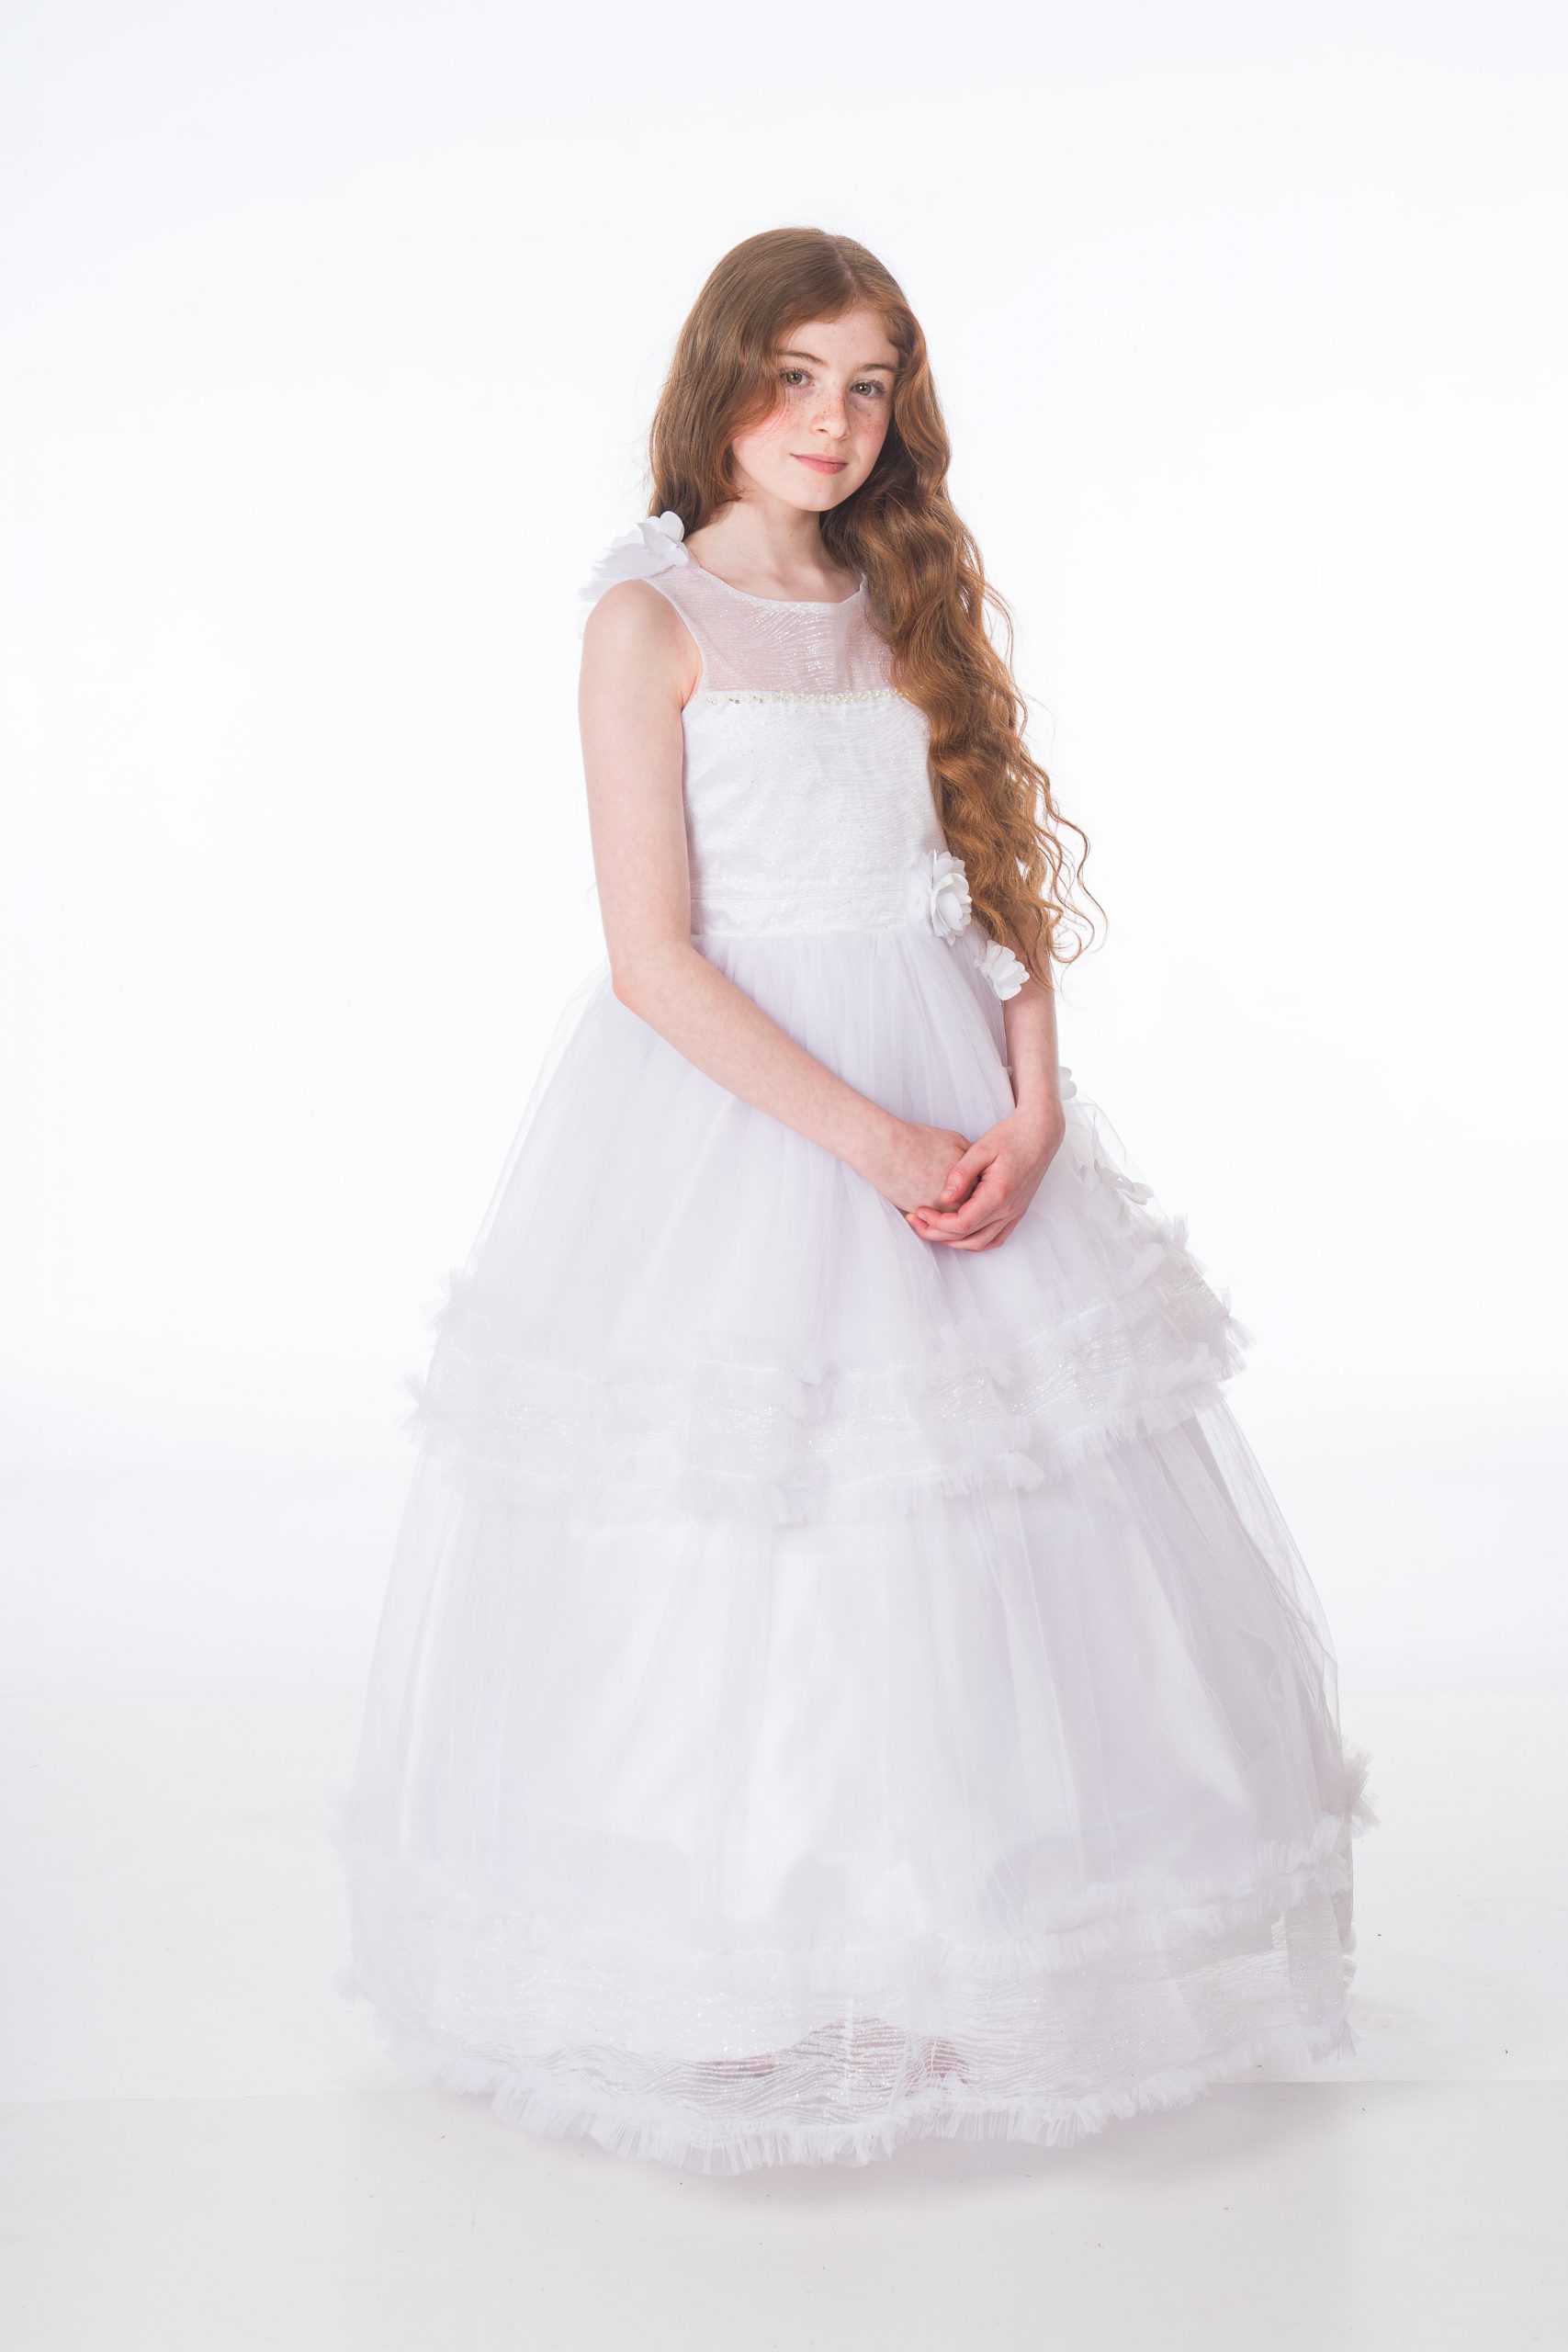 Sara Dresses Maya Communion Girls Dress - Cloudy White for Special Occasion Birthday Wedding Party Pageant Christmas Holiday Easter